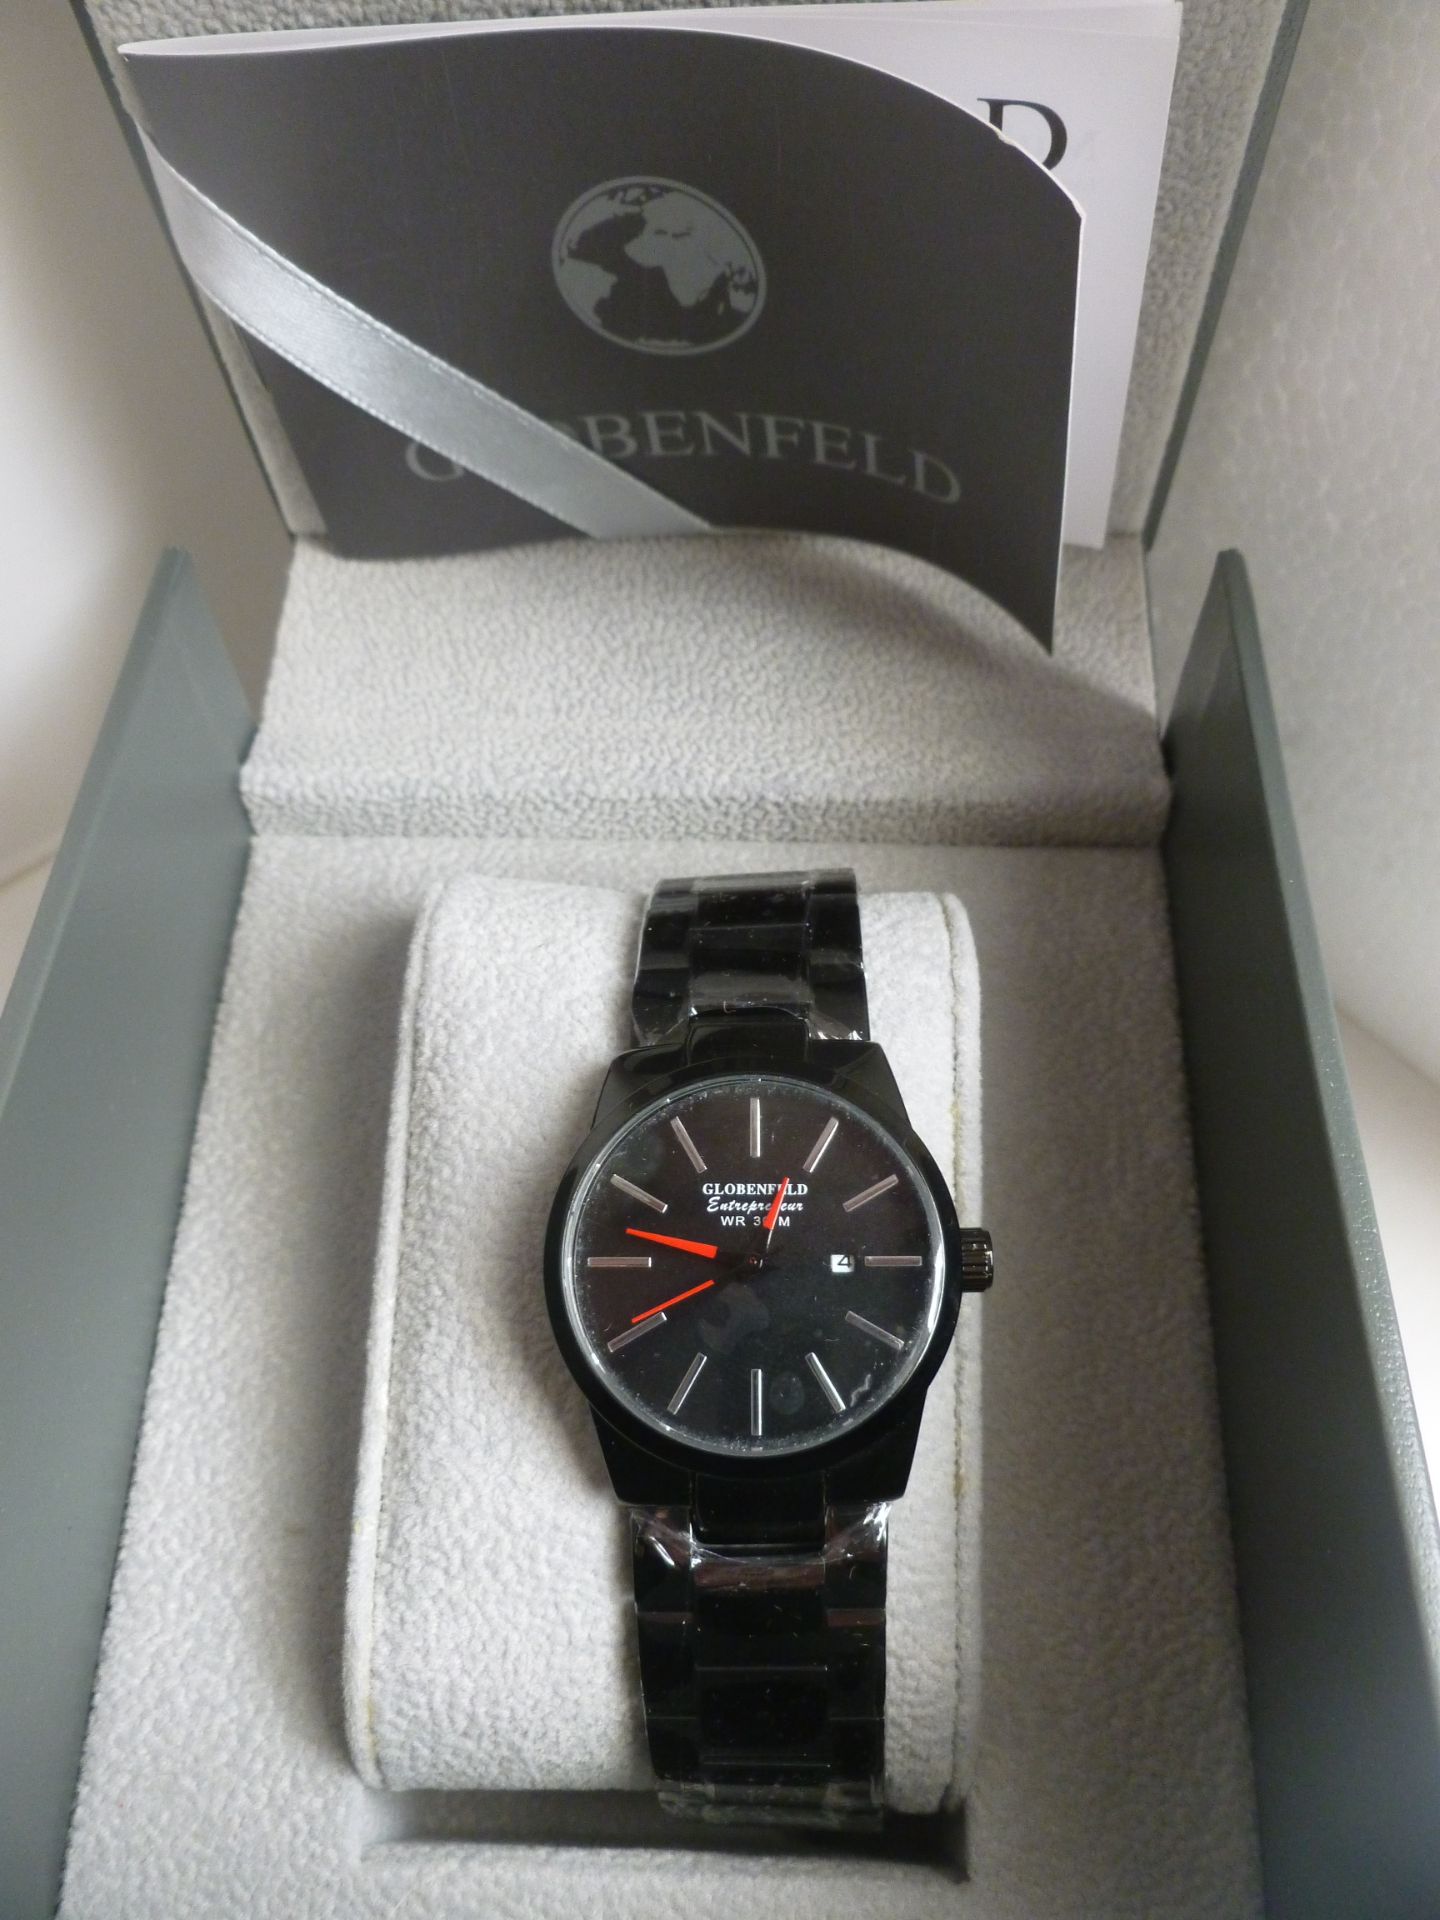 NO VAT!! Globenfeld limited edition Entrepreneur Ladies Watch with high shine black strap and